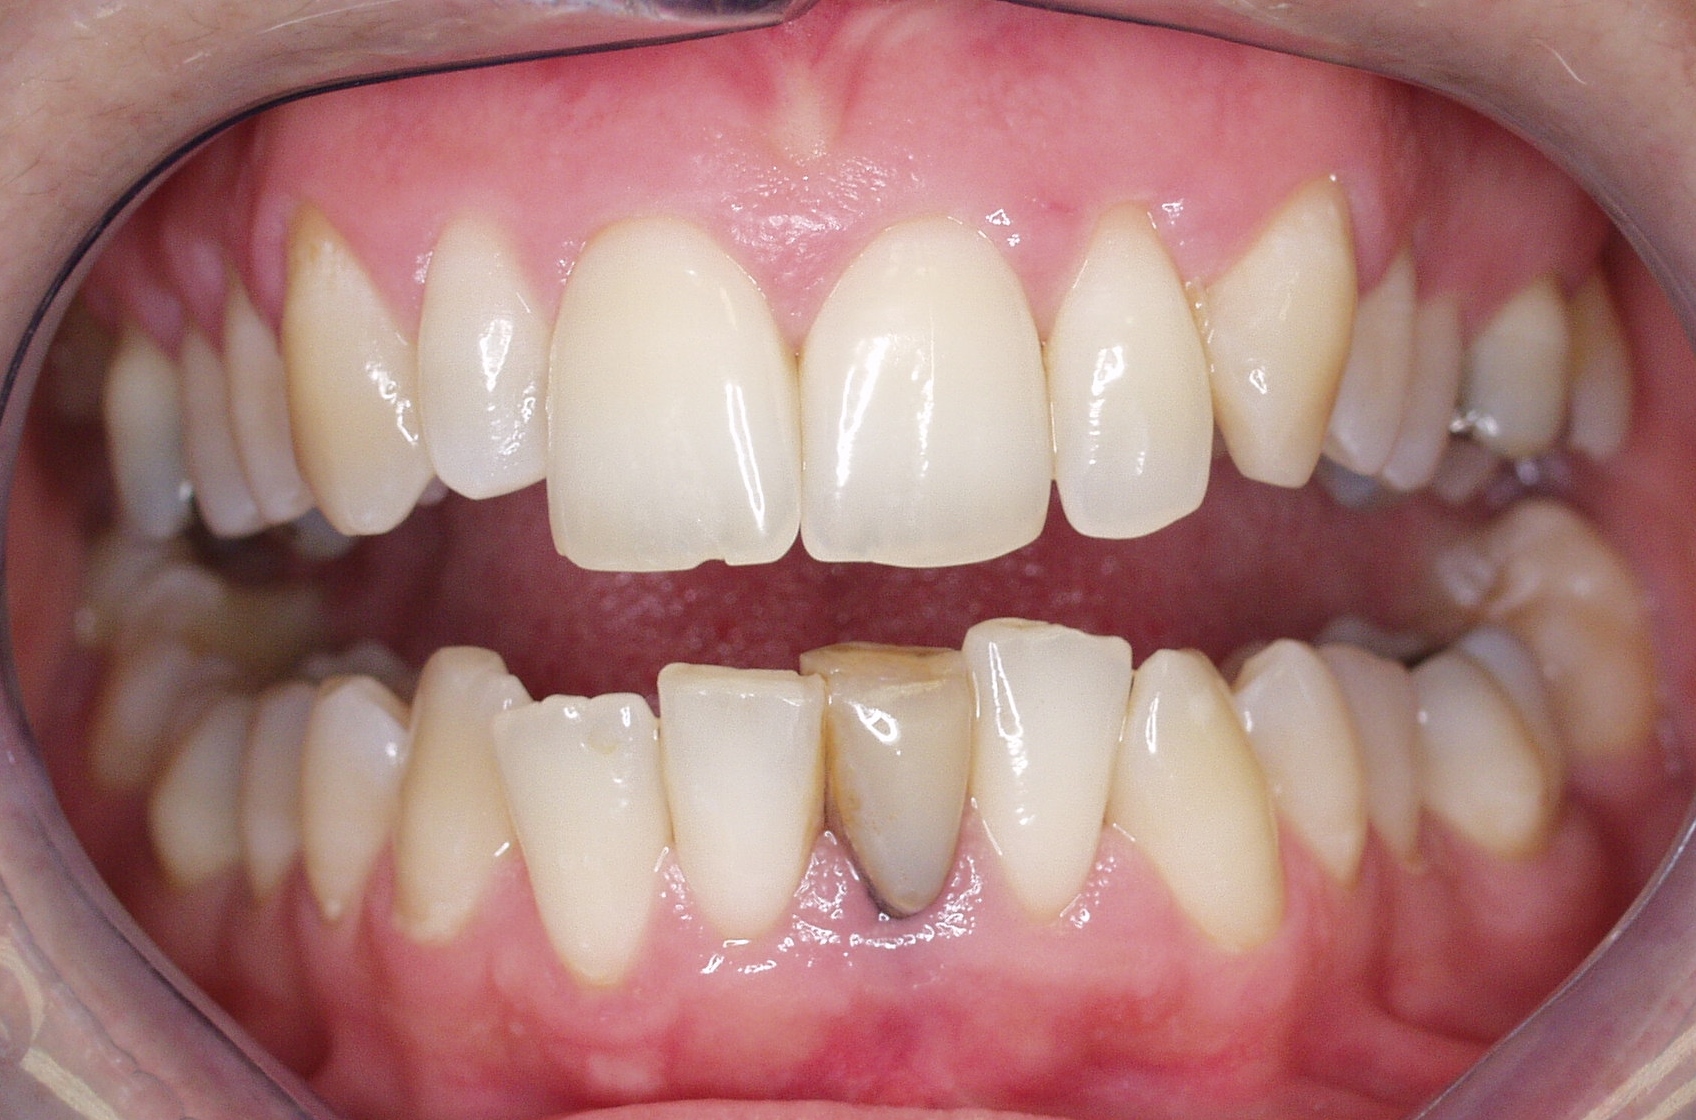 Patient's front lower tooth became damanged beyond repair